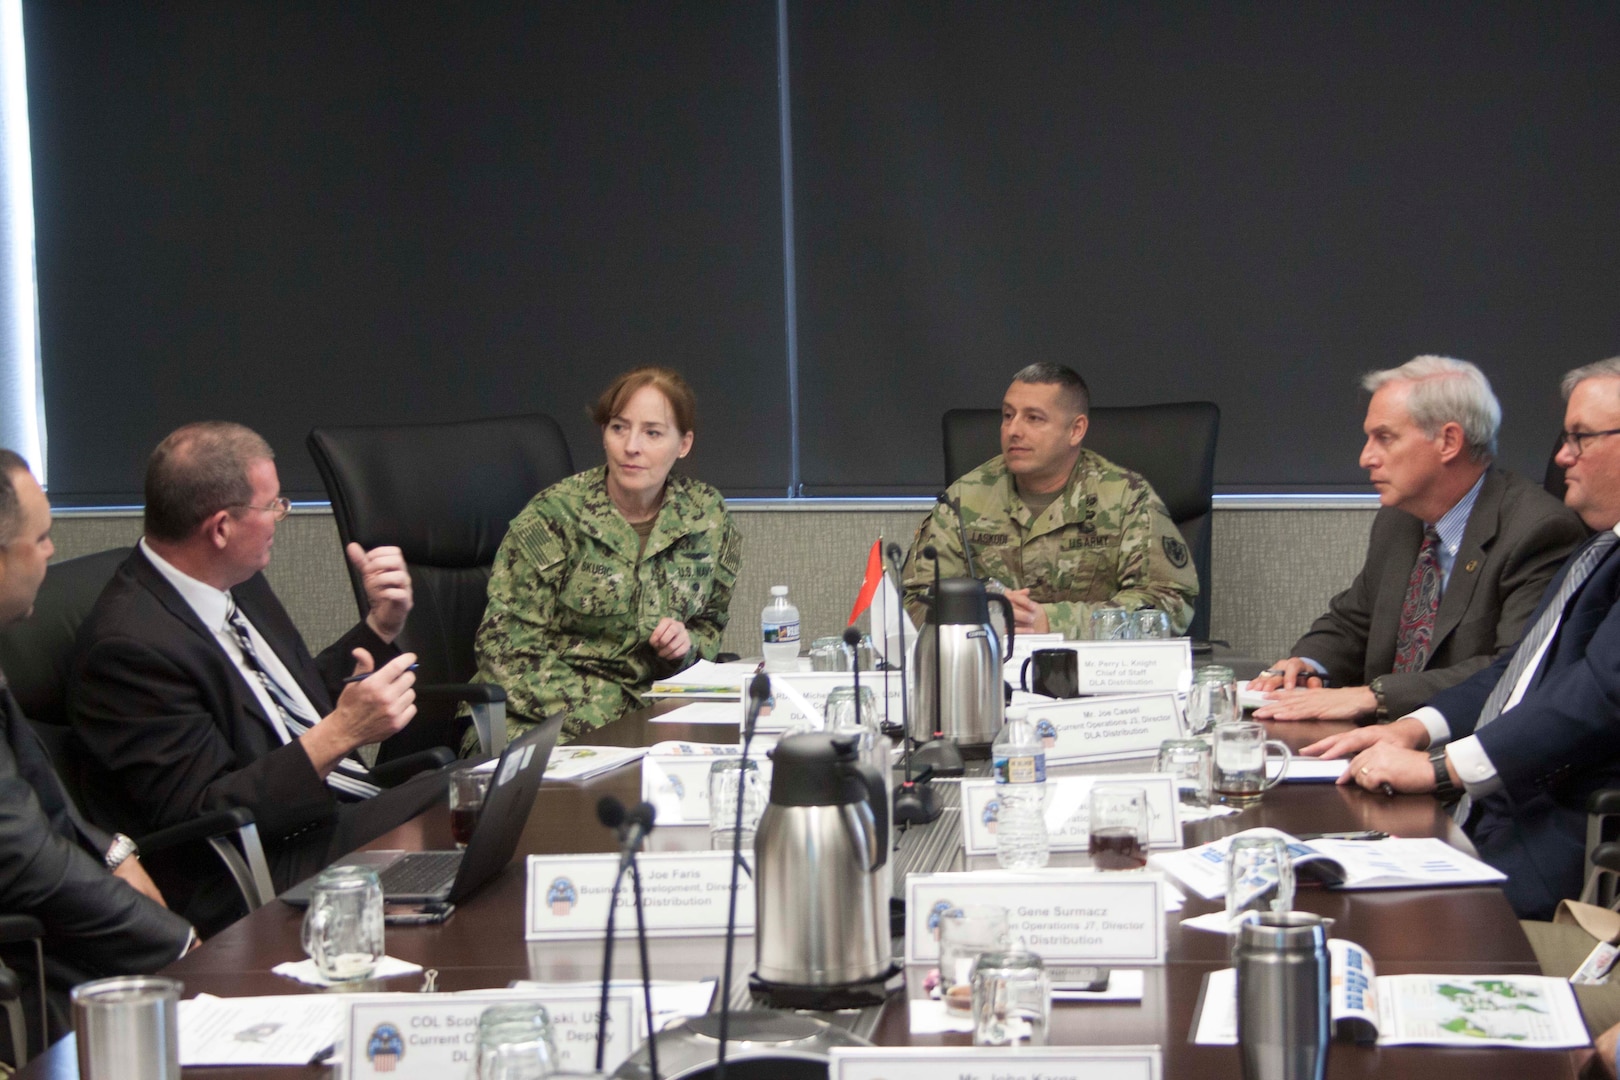 Scott Rosbaugh, DLA Distribution Future Plans director, left, outlines DLA Distribution’s Campaign Plan to DLA Land and Maritime commander Navy Rear Adm. Michelle Skubic, second from left, during a roundtable discussion with DLA Distribution commander Army Brig. Gen. John Laskodi.  